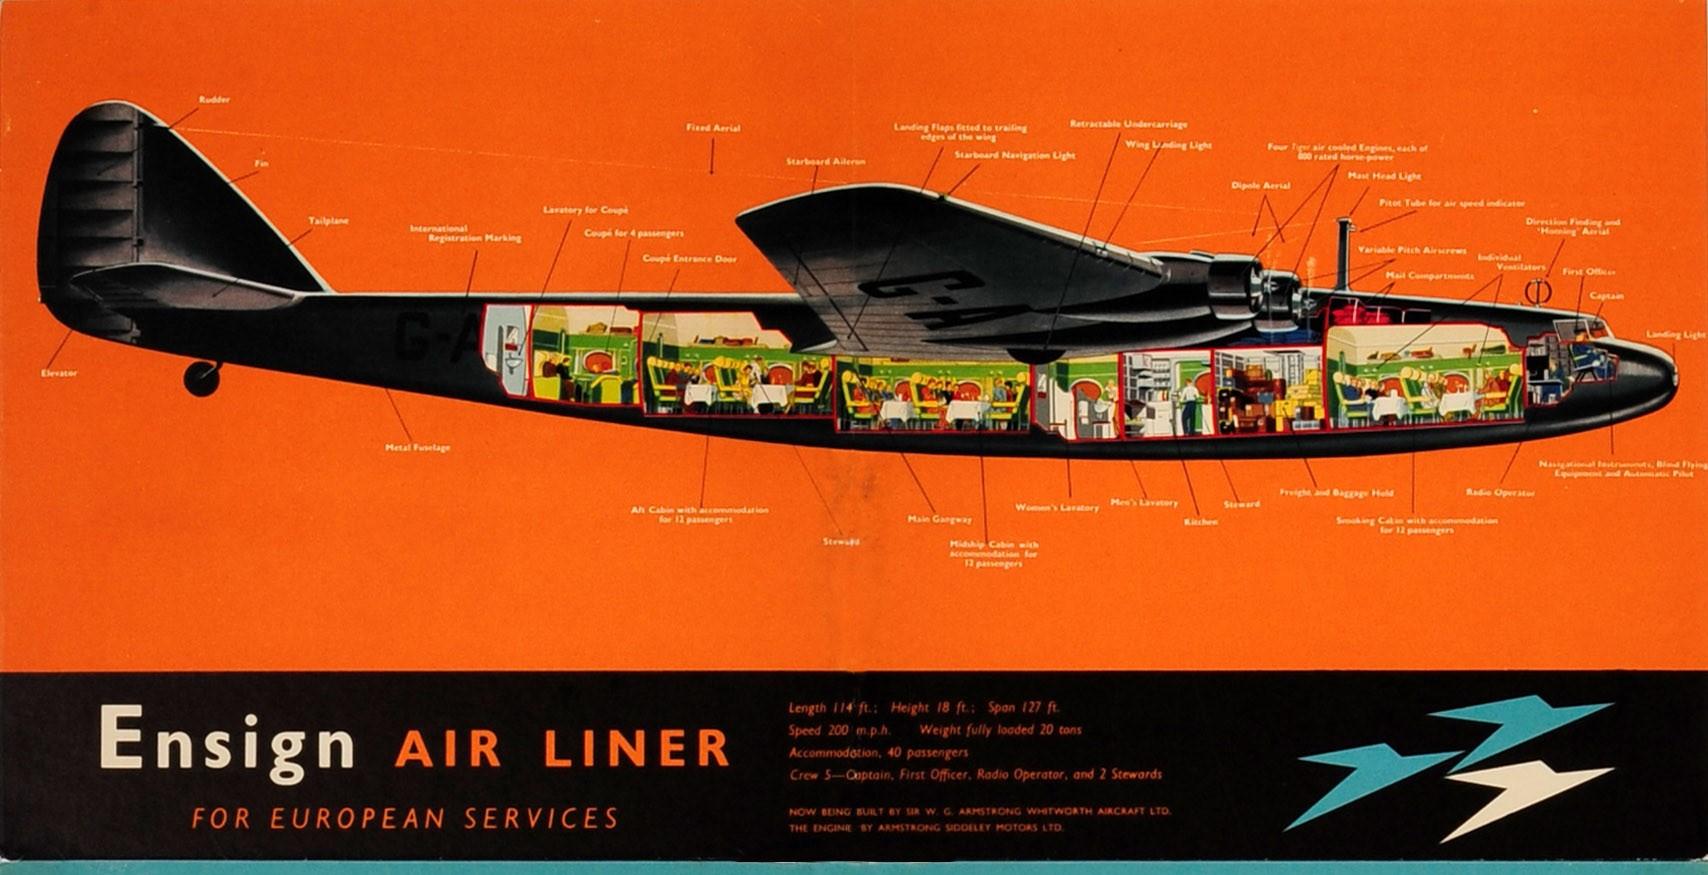 Original vintage imperial airways travel advertising poster featuring images and details on three planes - Ensign Air Liner for European and Empire Services and Empire Flying Boat - with the speedbird logo and annotations and illustrations of the